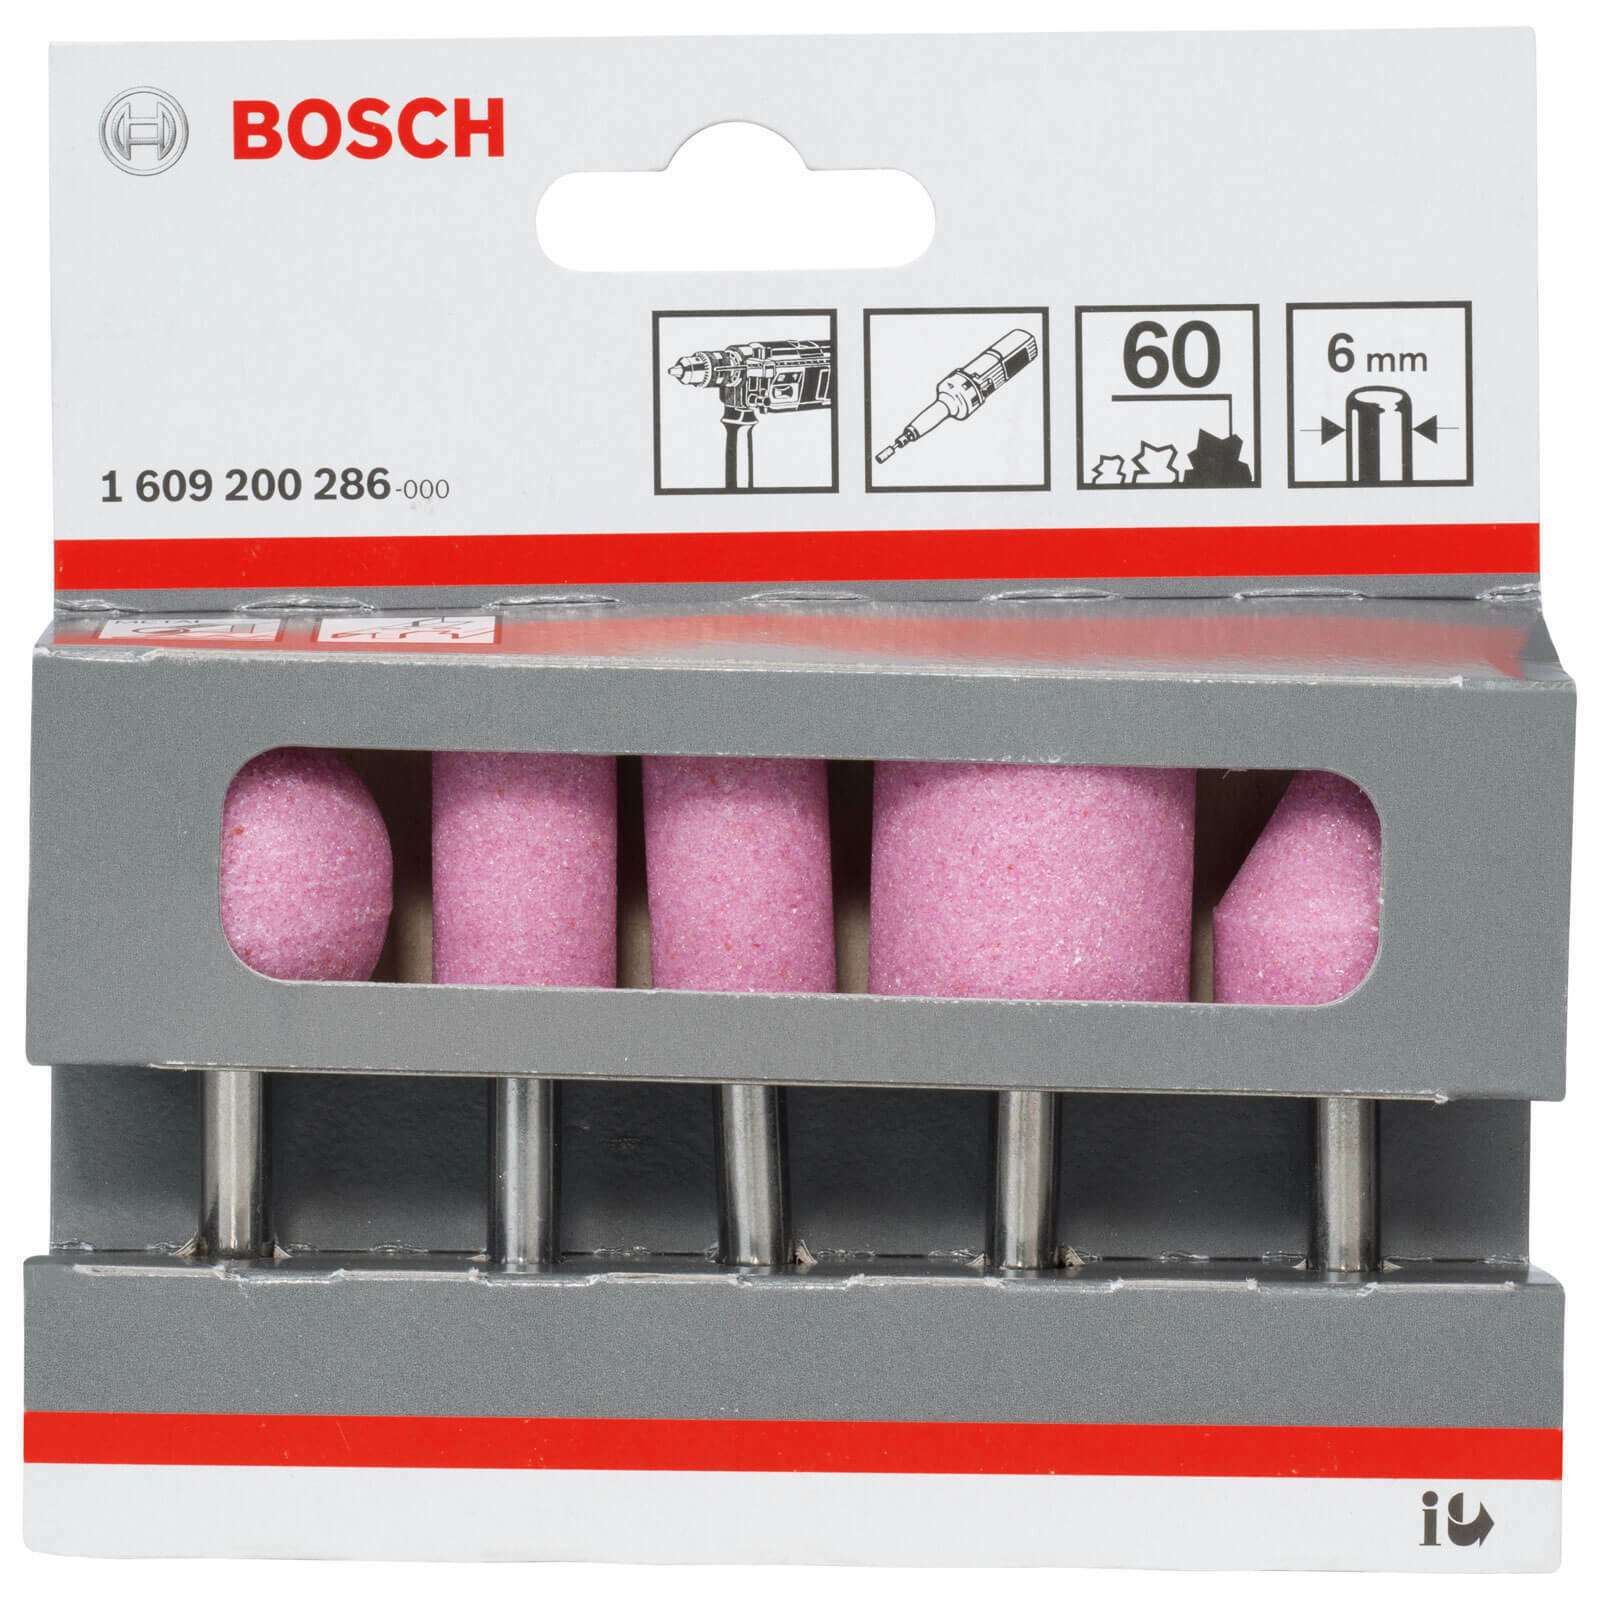 Bosch 5-piece mounted point set 1609200286 Power Tool Services